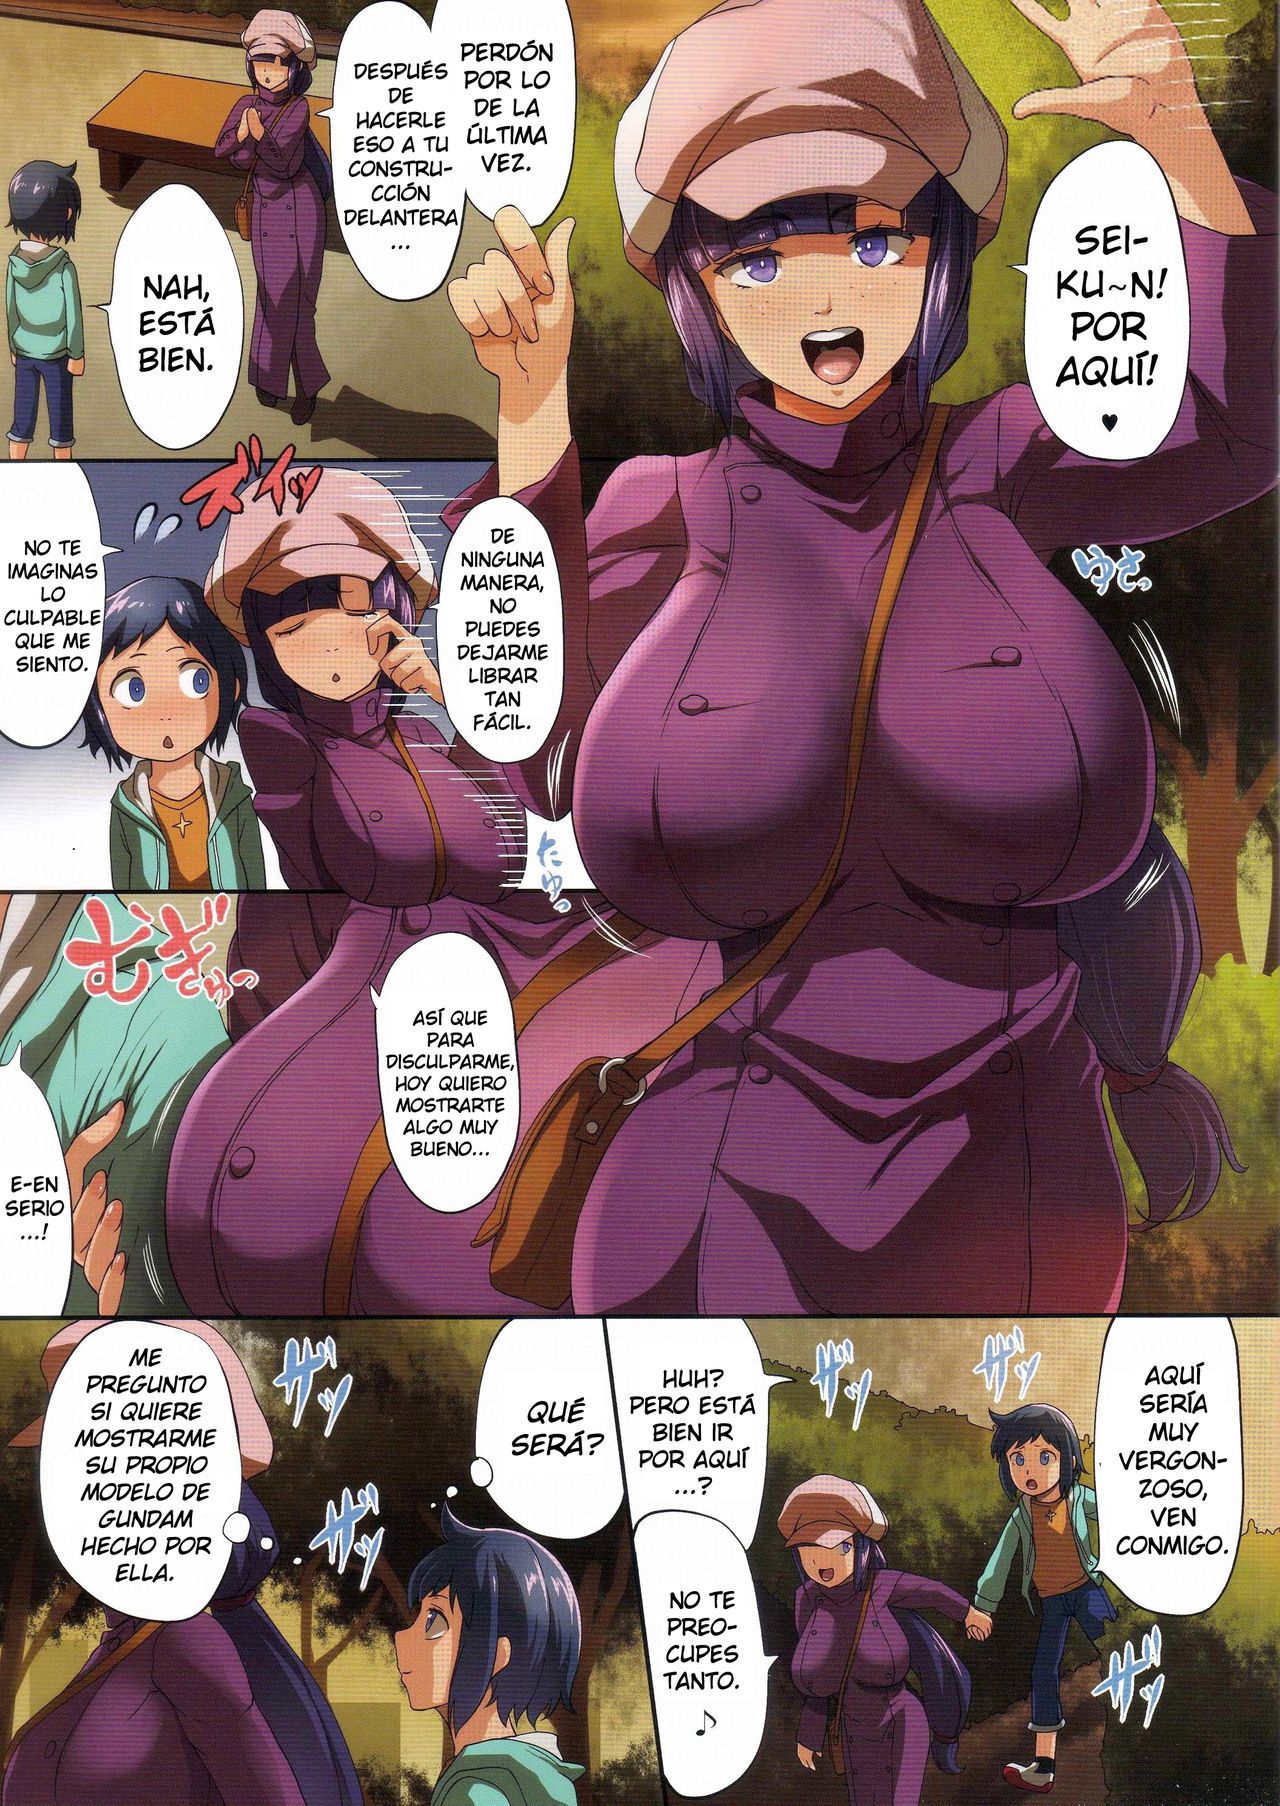 STARBUST MEMORY (Gundam Build Fighters) Color - 2